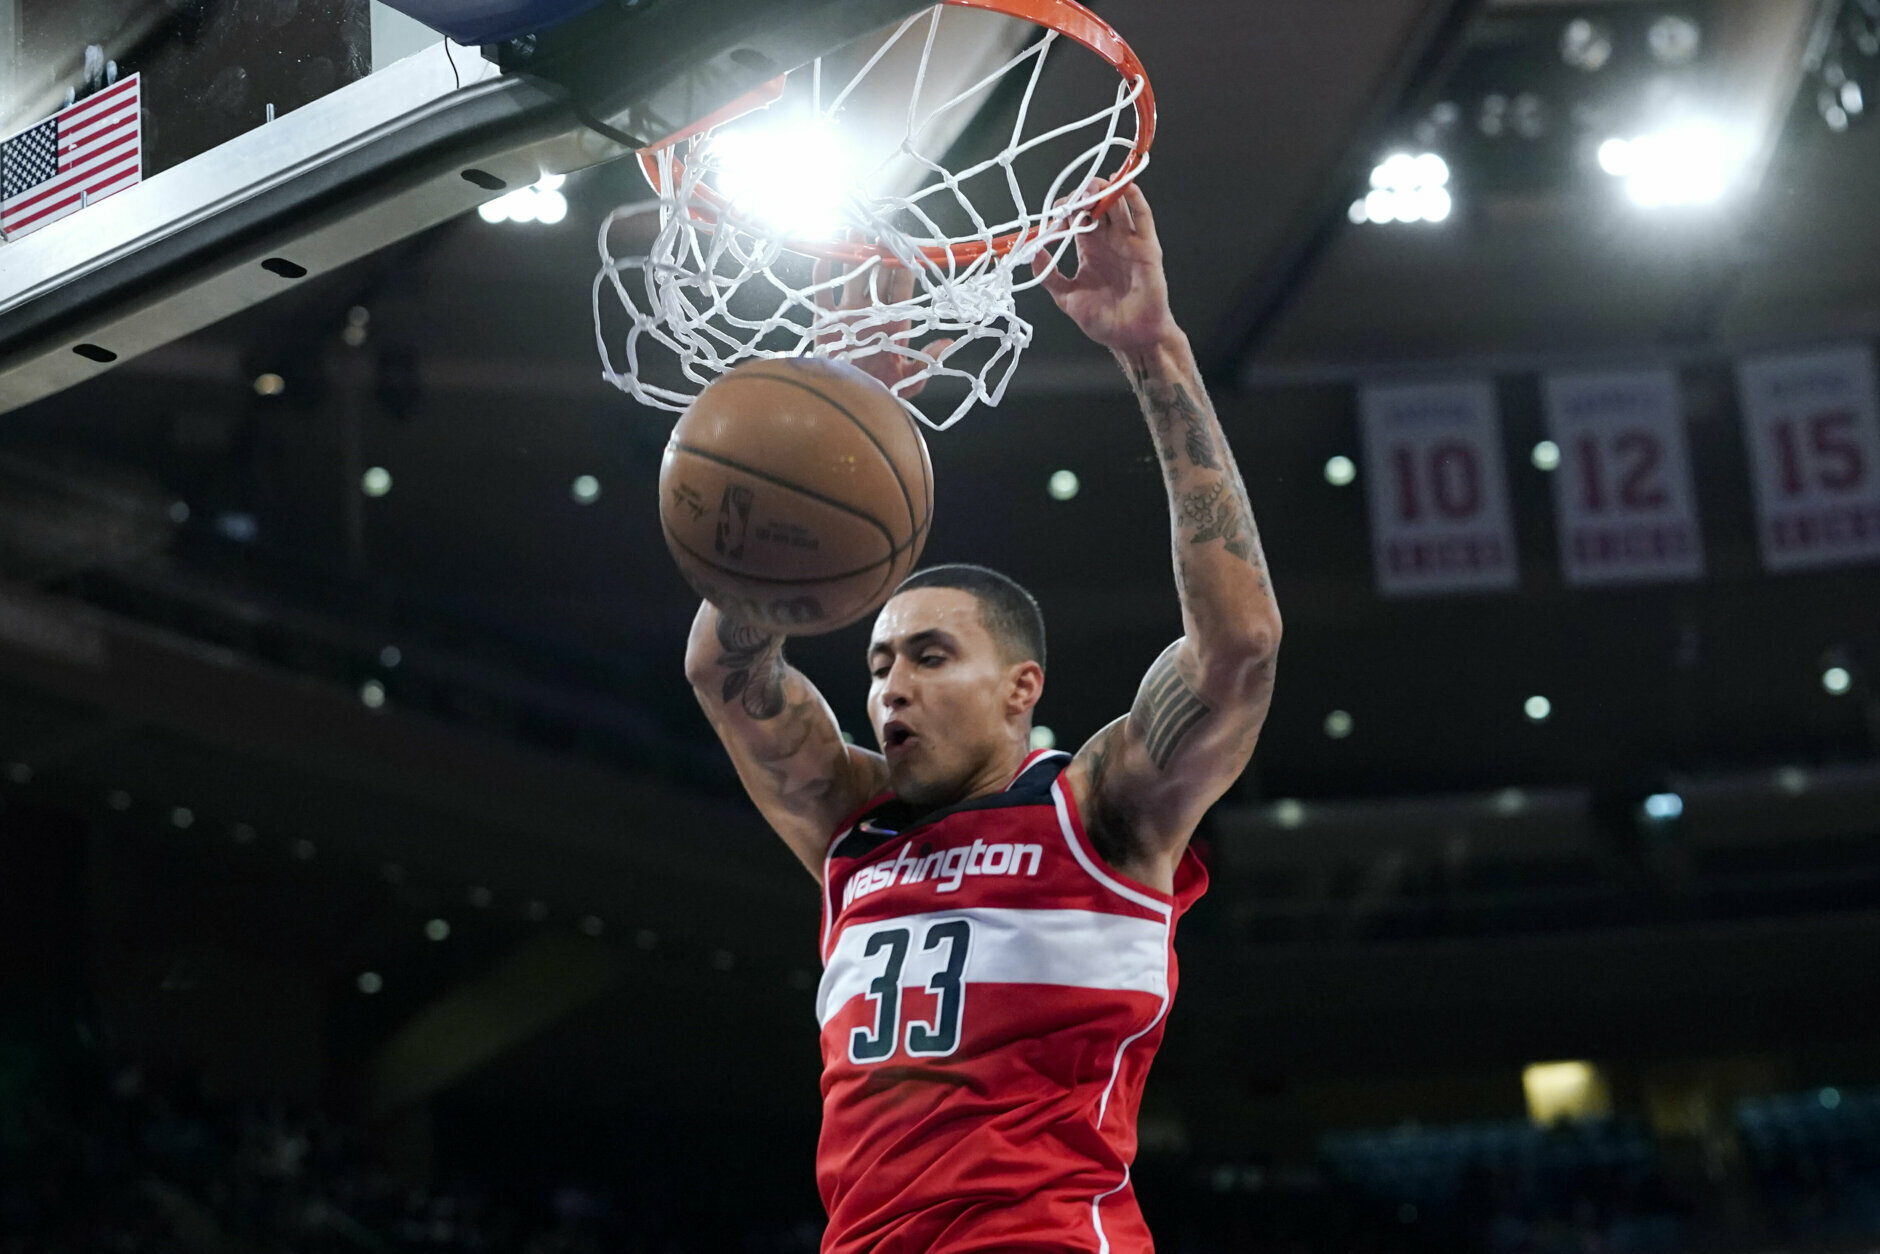 Washington Wizards forward Kyle Kuzma dunks during the first half of the team's preseason NBA basketball game against the New York Knicks, Friday, Oct. 15, 2021, at Madison Square Garden in New York. (AP Photo/Mary Altaffer)